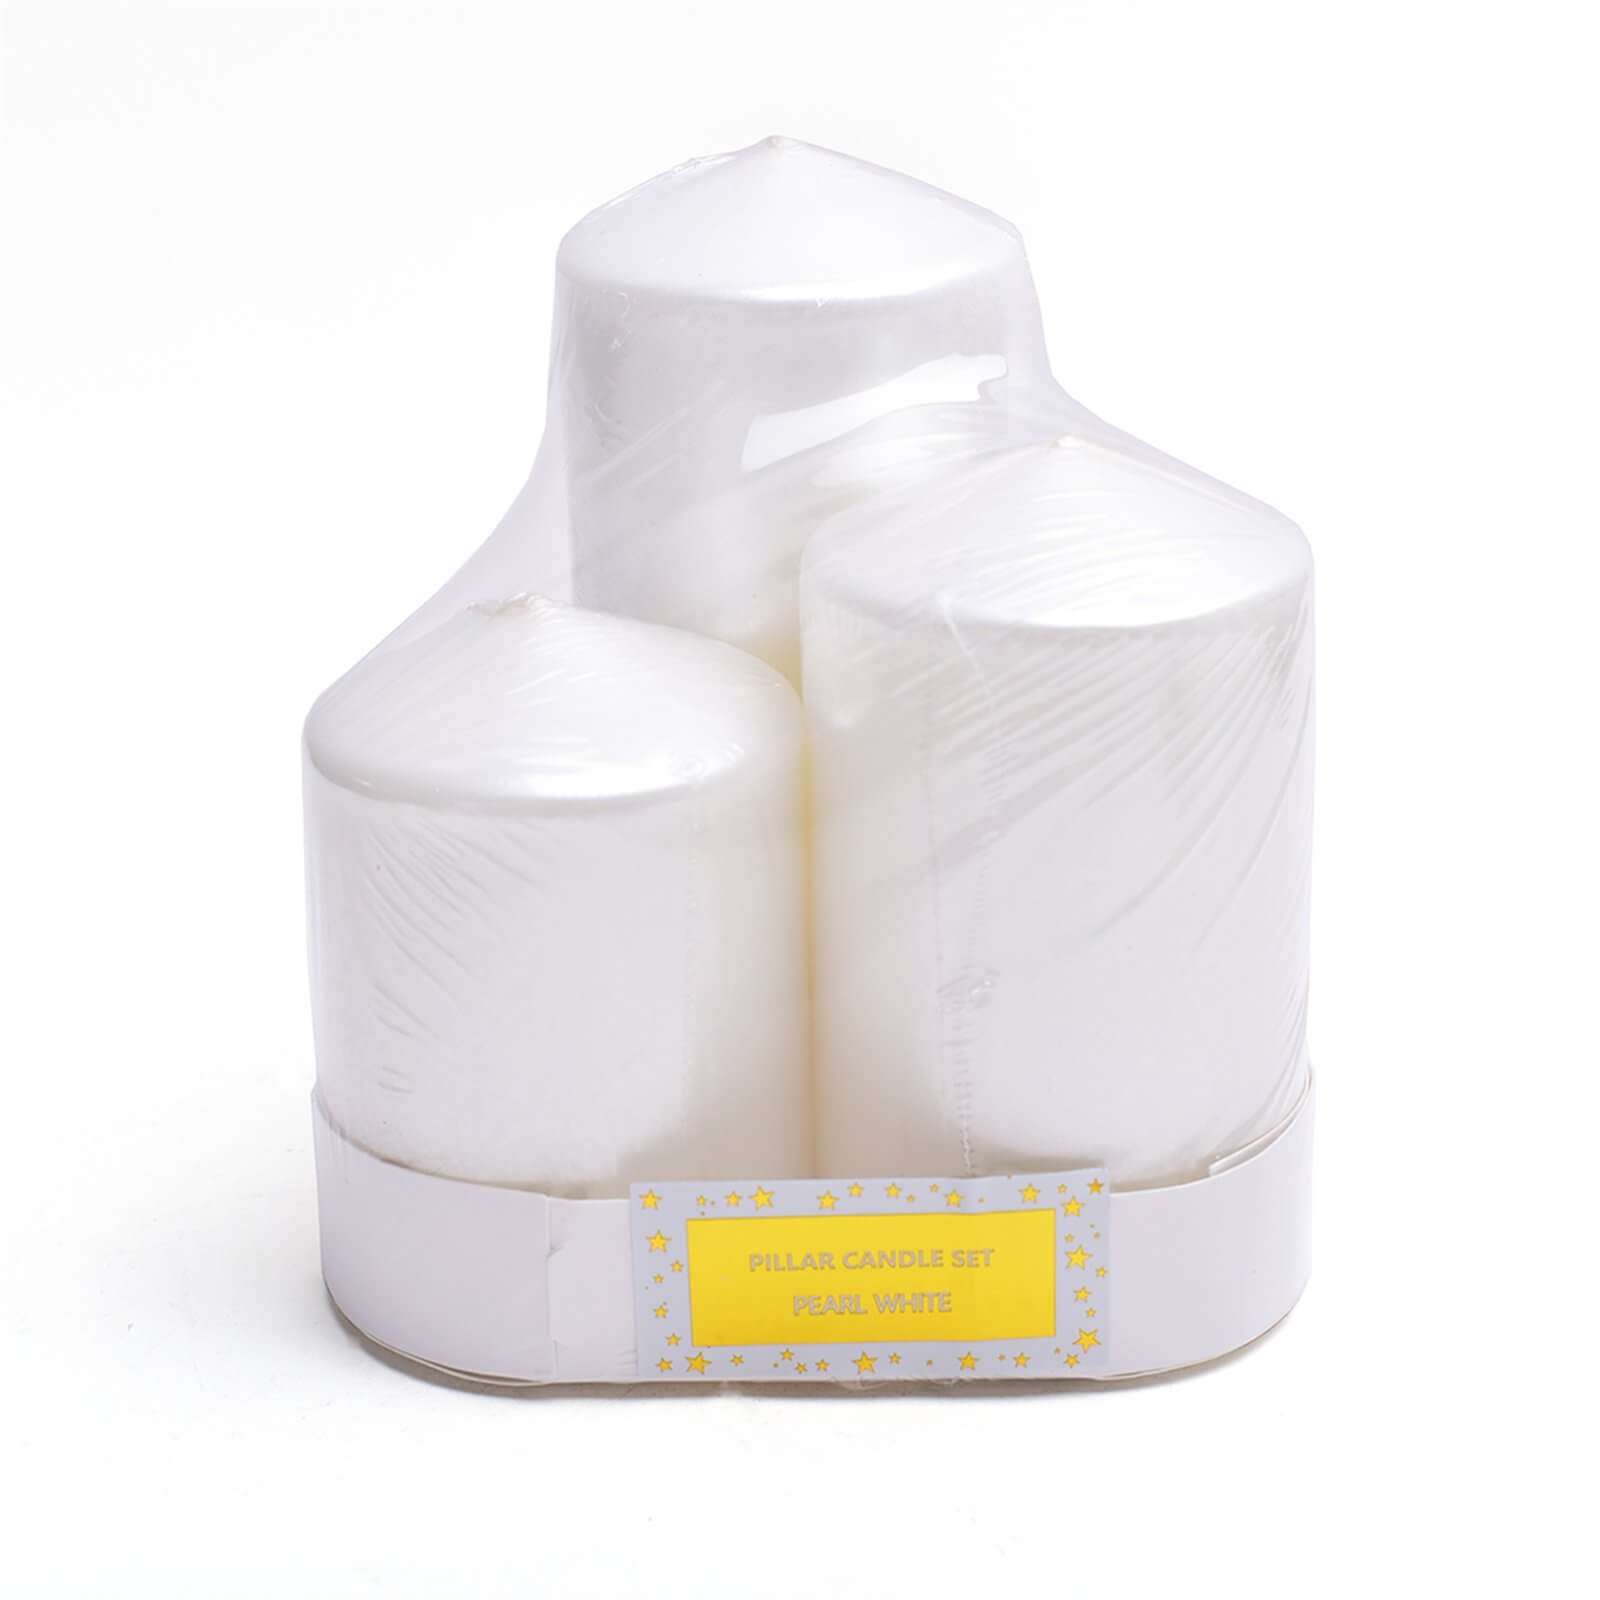 Pillar Candle 3 Pack - Pearl White